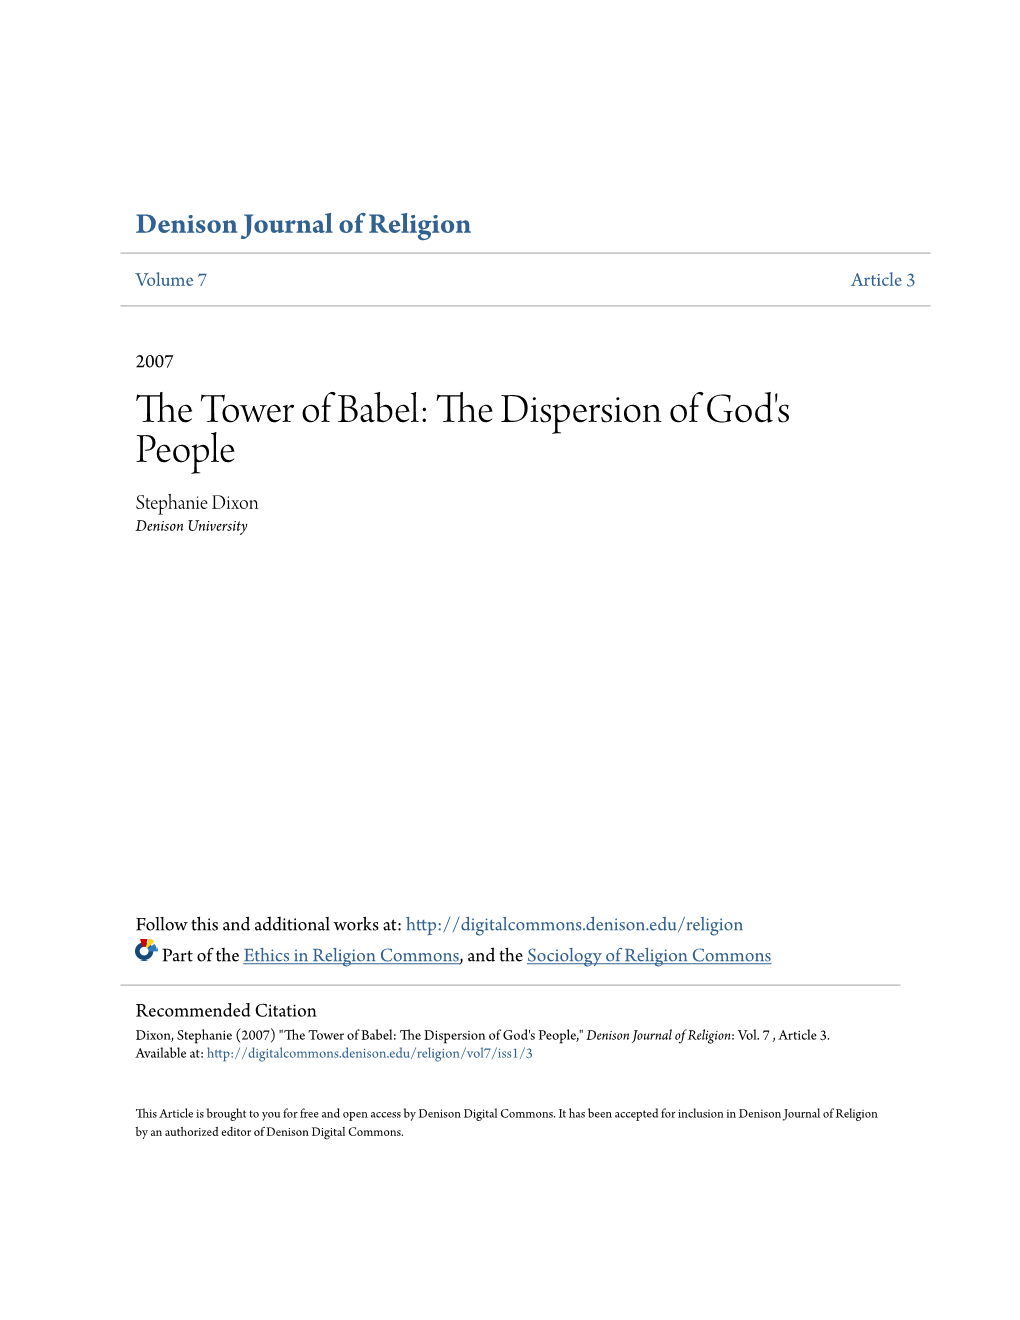 The Tower of Babel: the Dispersion of God's People